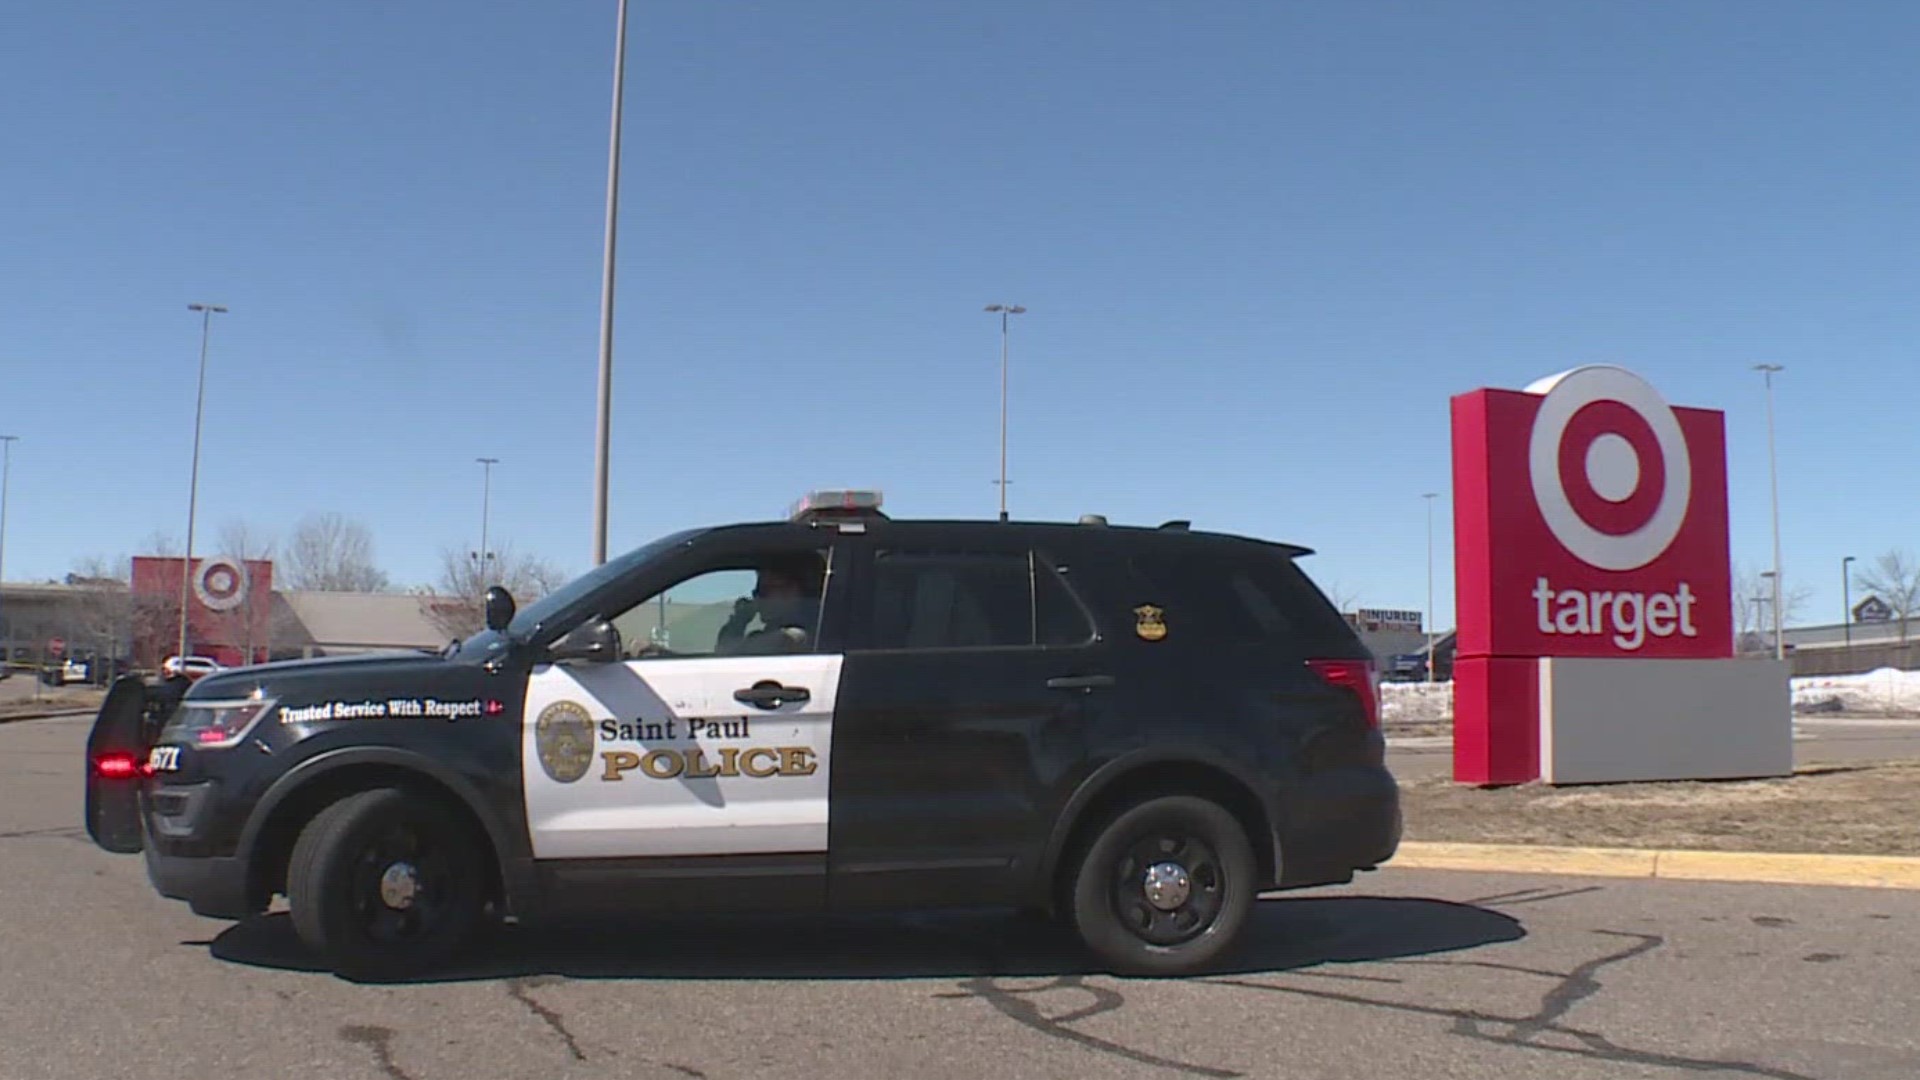 Police say the victim was shot in the parking lot of Target at 1744 Suburban Ave., and was then rushed to a nearby fire station where he was pronounced dead.